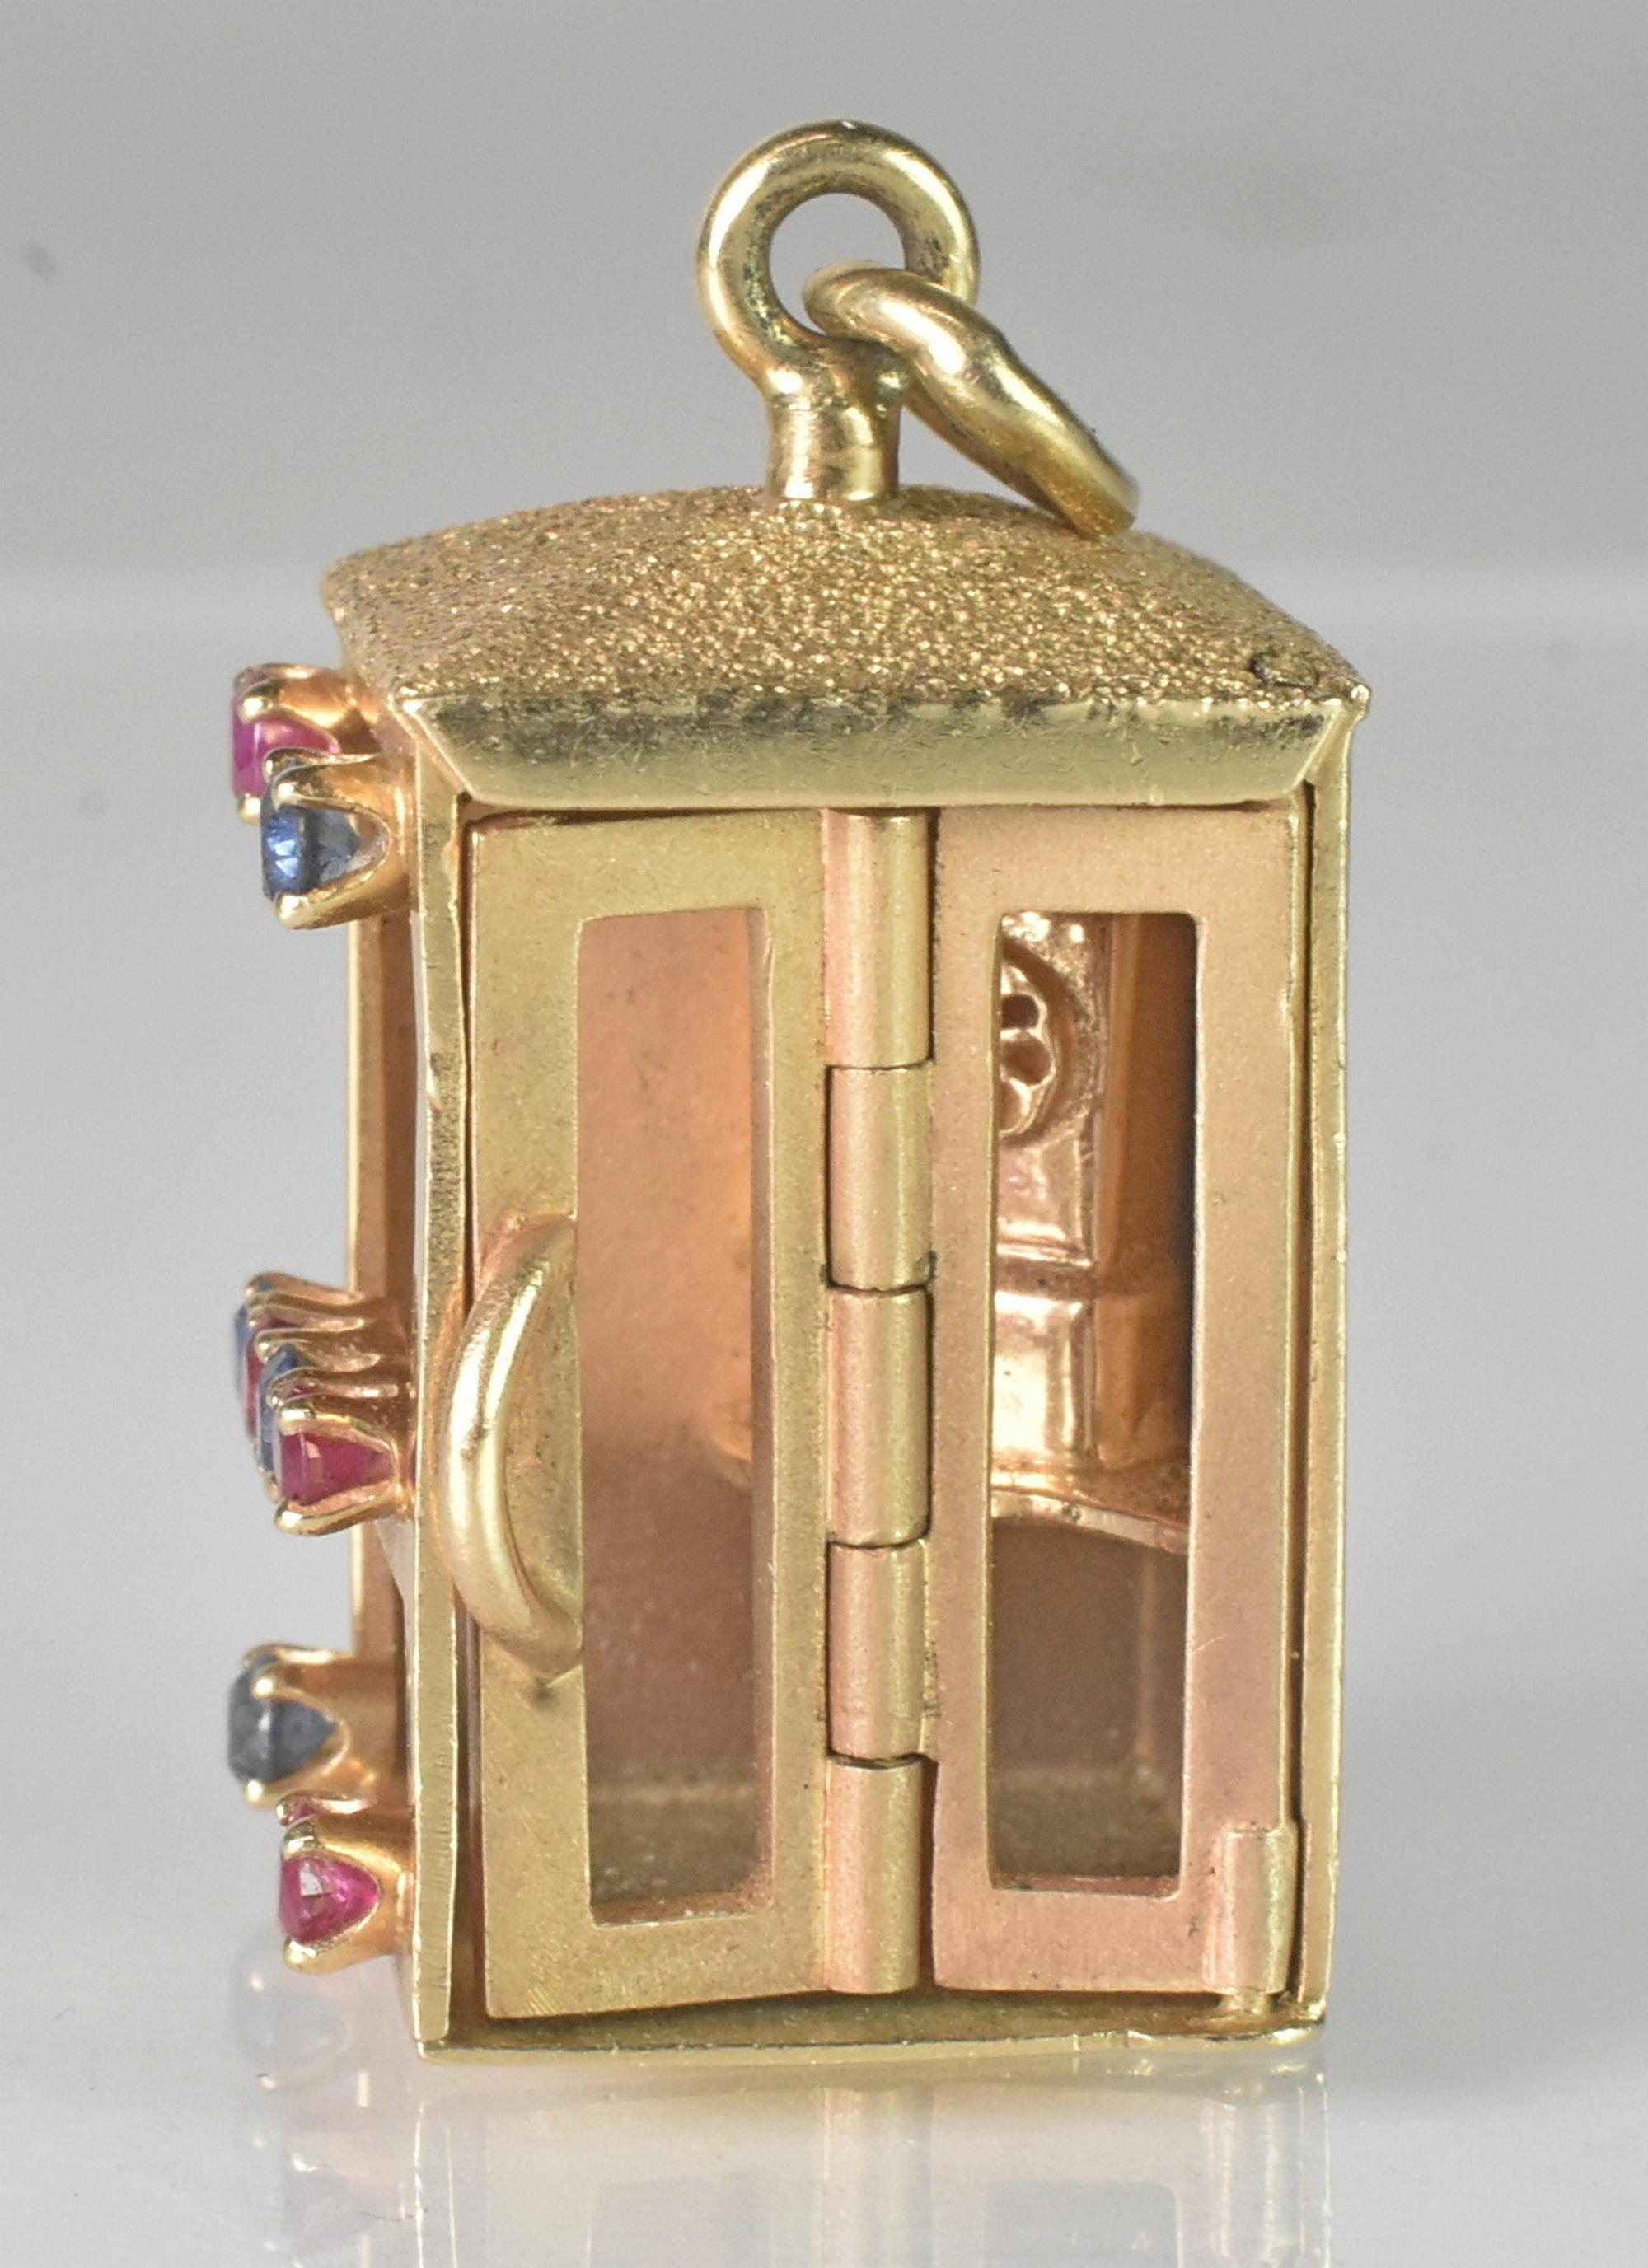 14k Gold Phonebooth Charm Pendant with Gems by Dankner In Good Condition For Sale In Toledo, OH